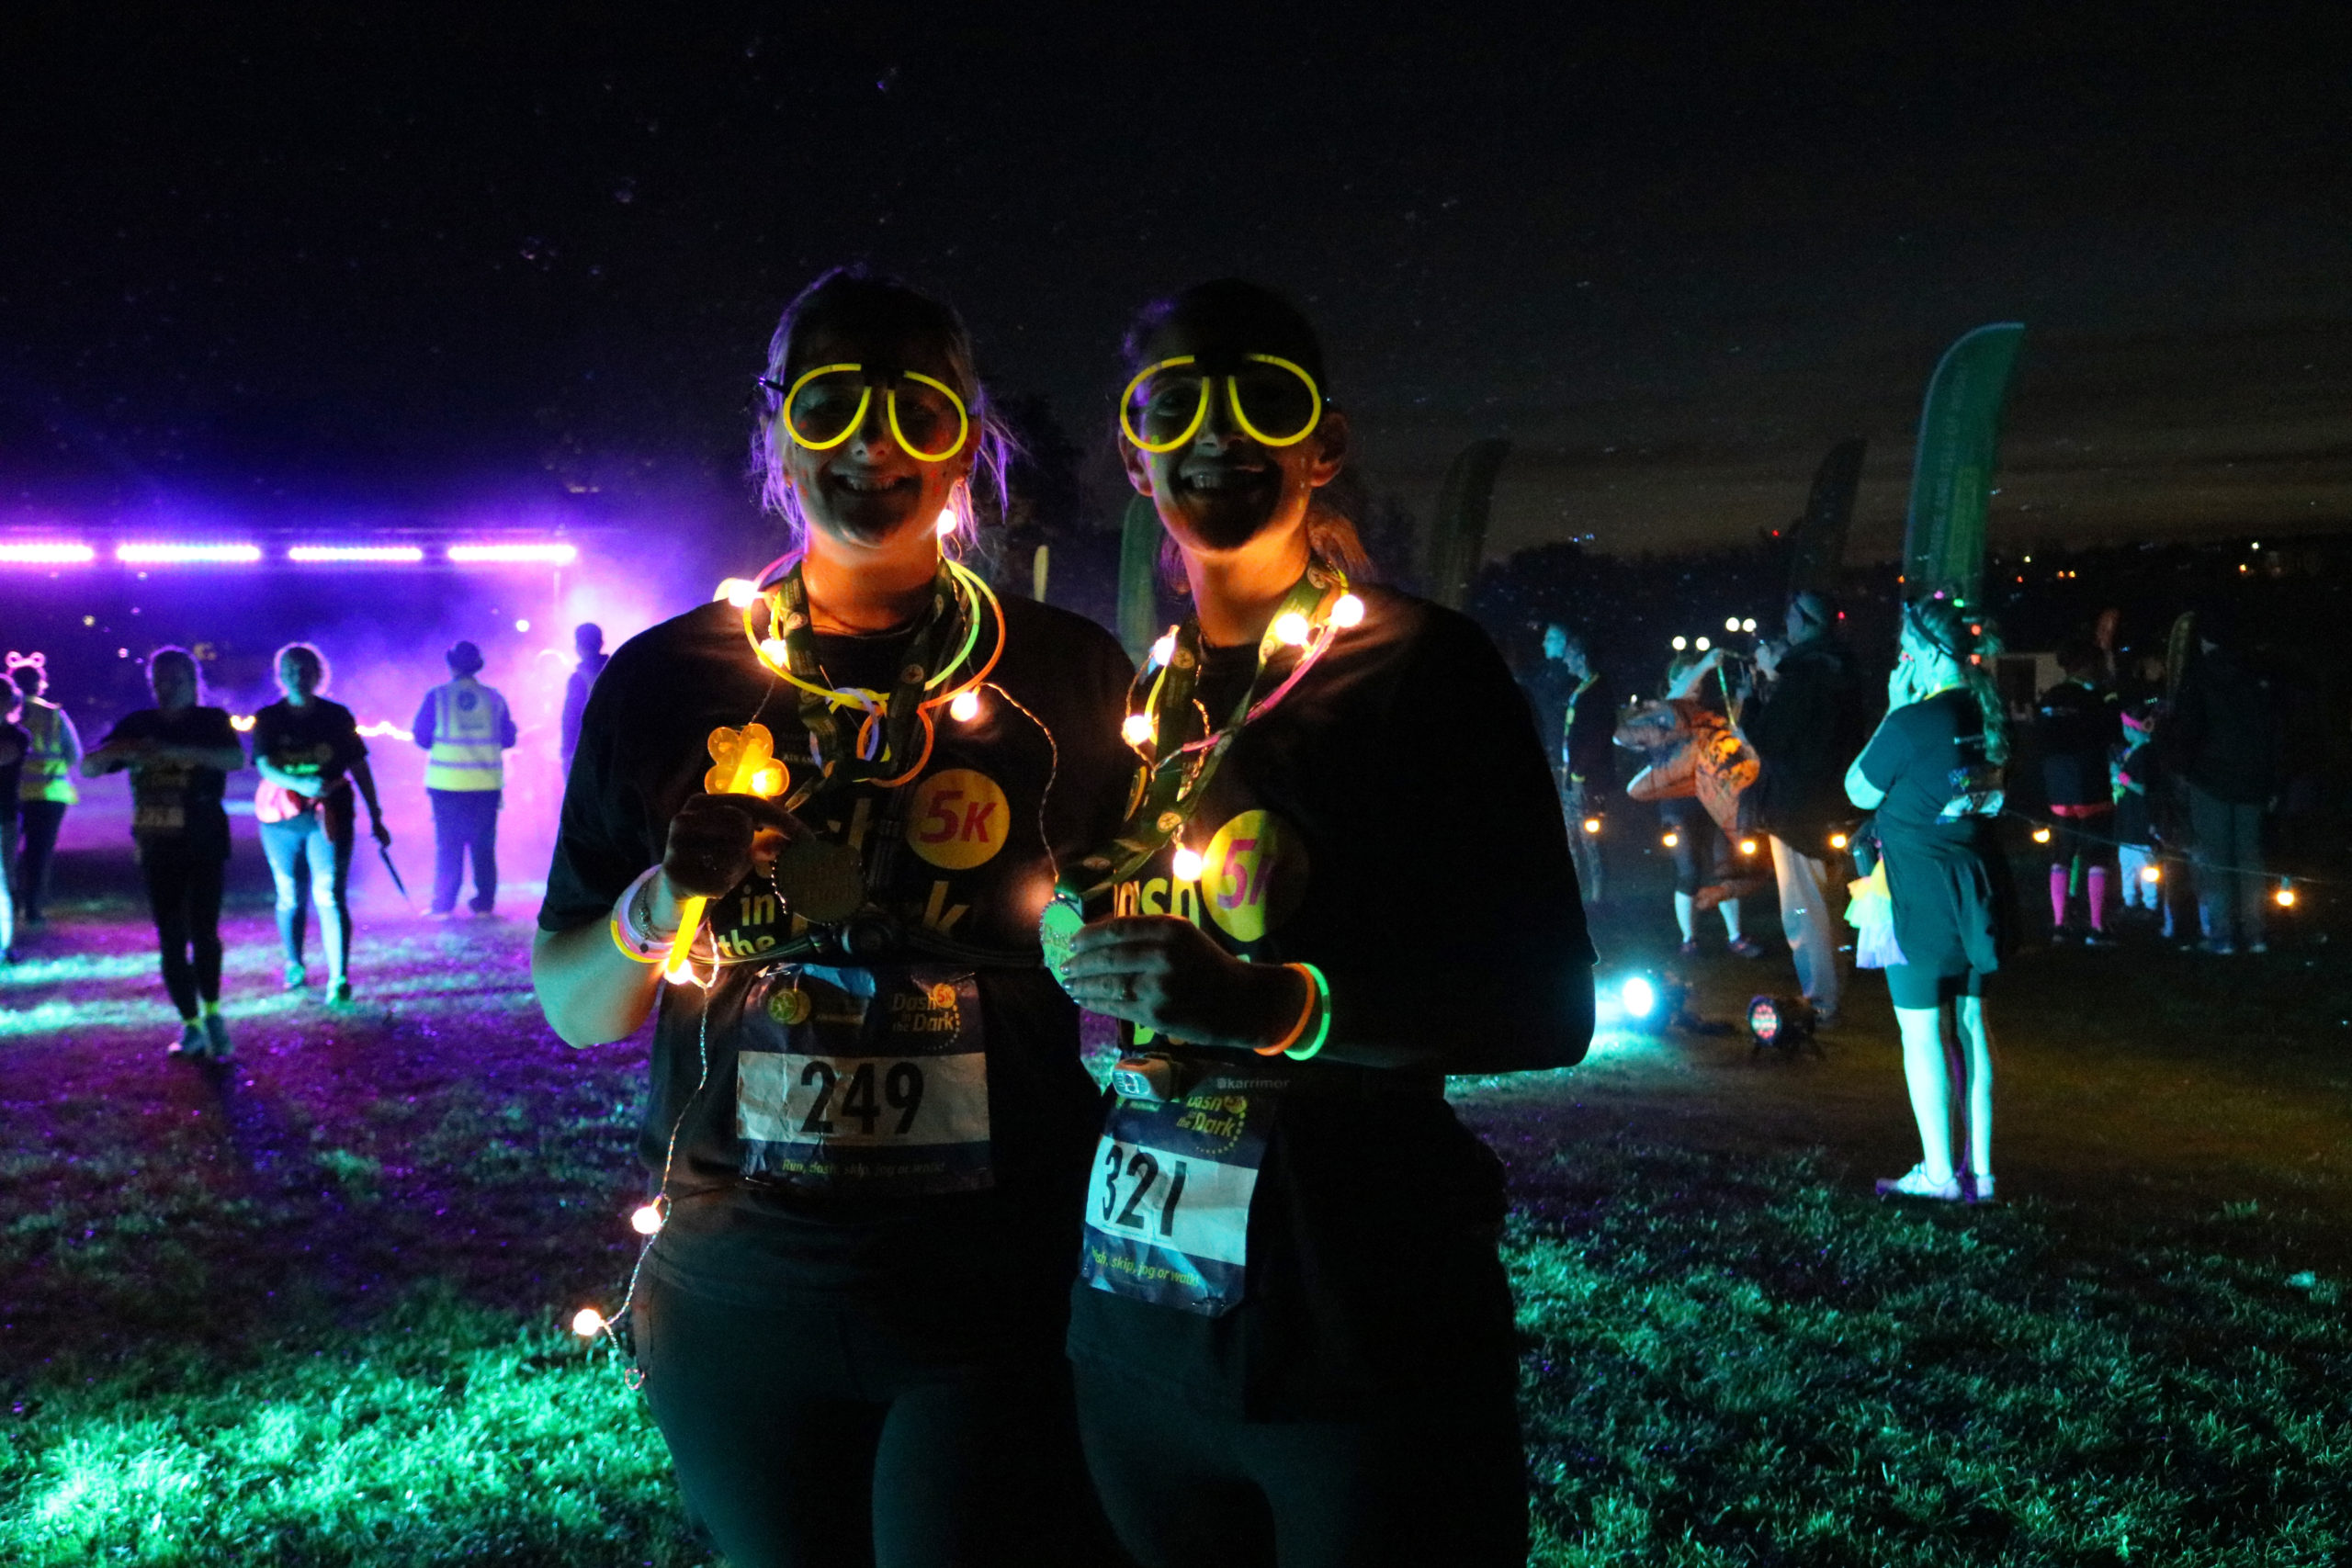 Two people in darkness wearing glow sticks and lights